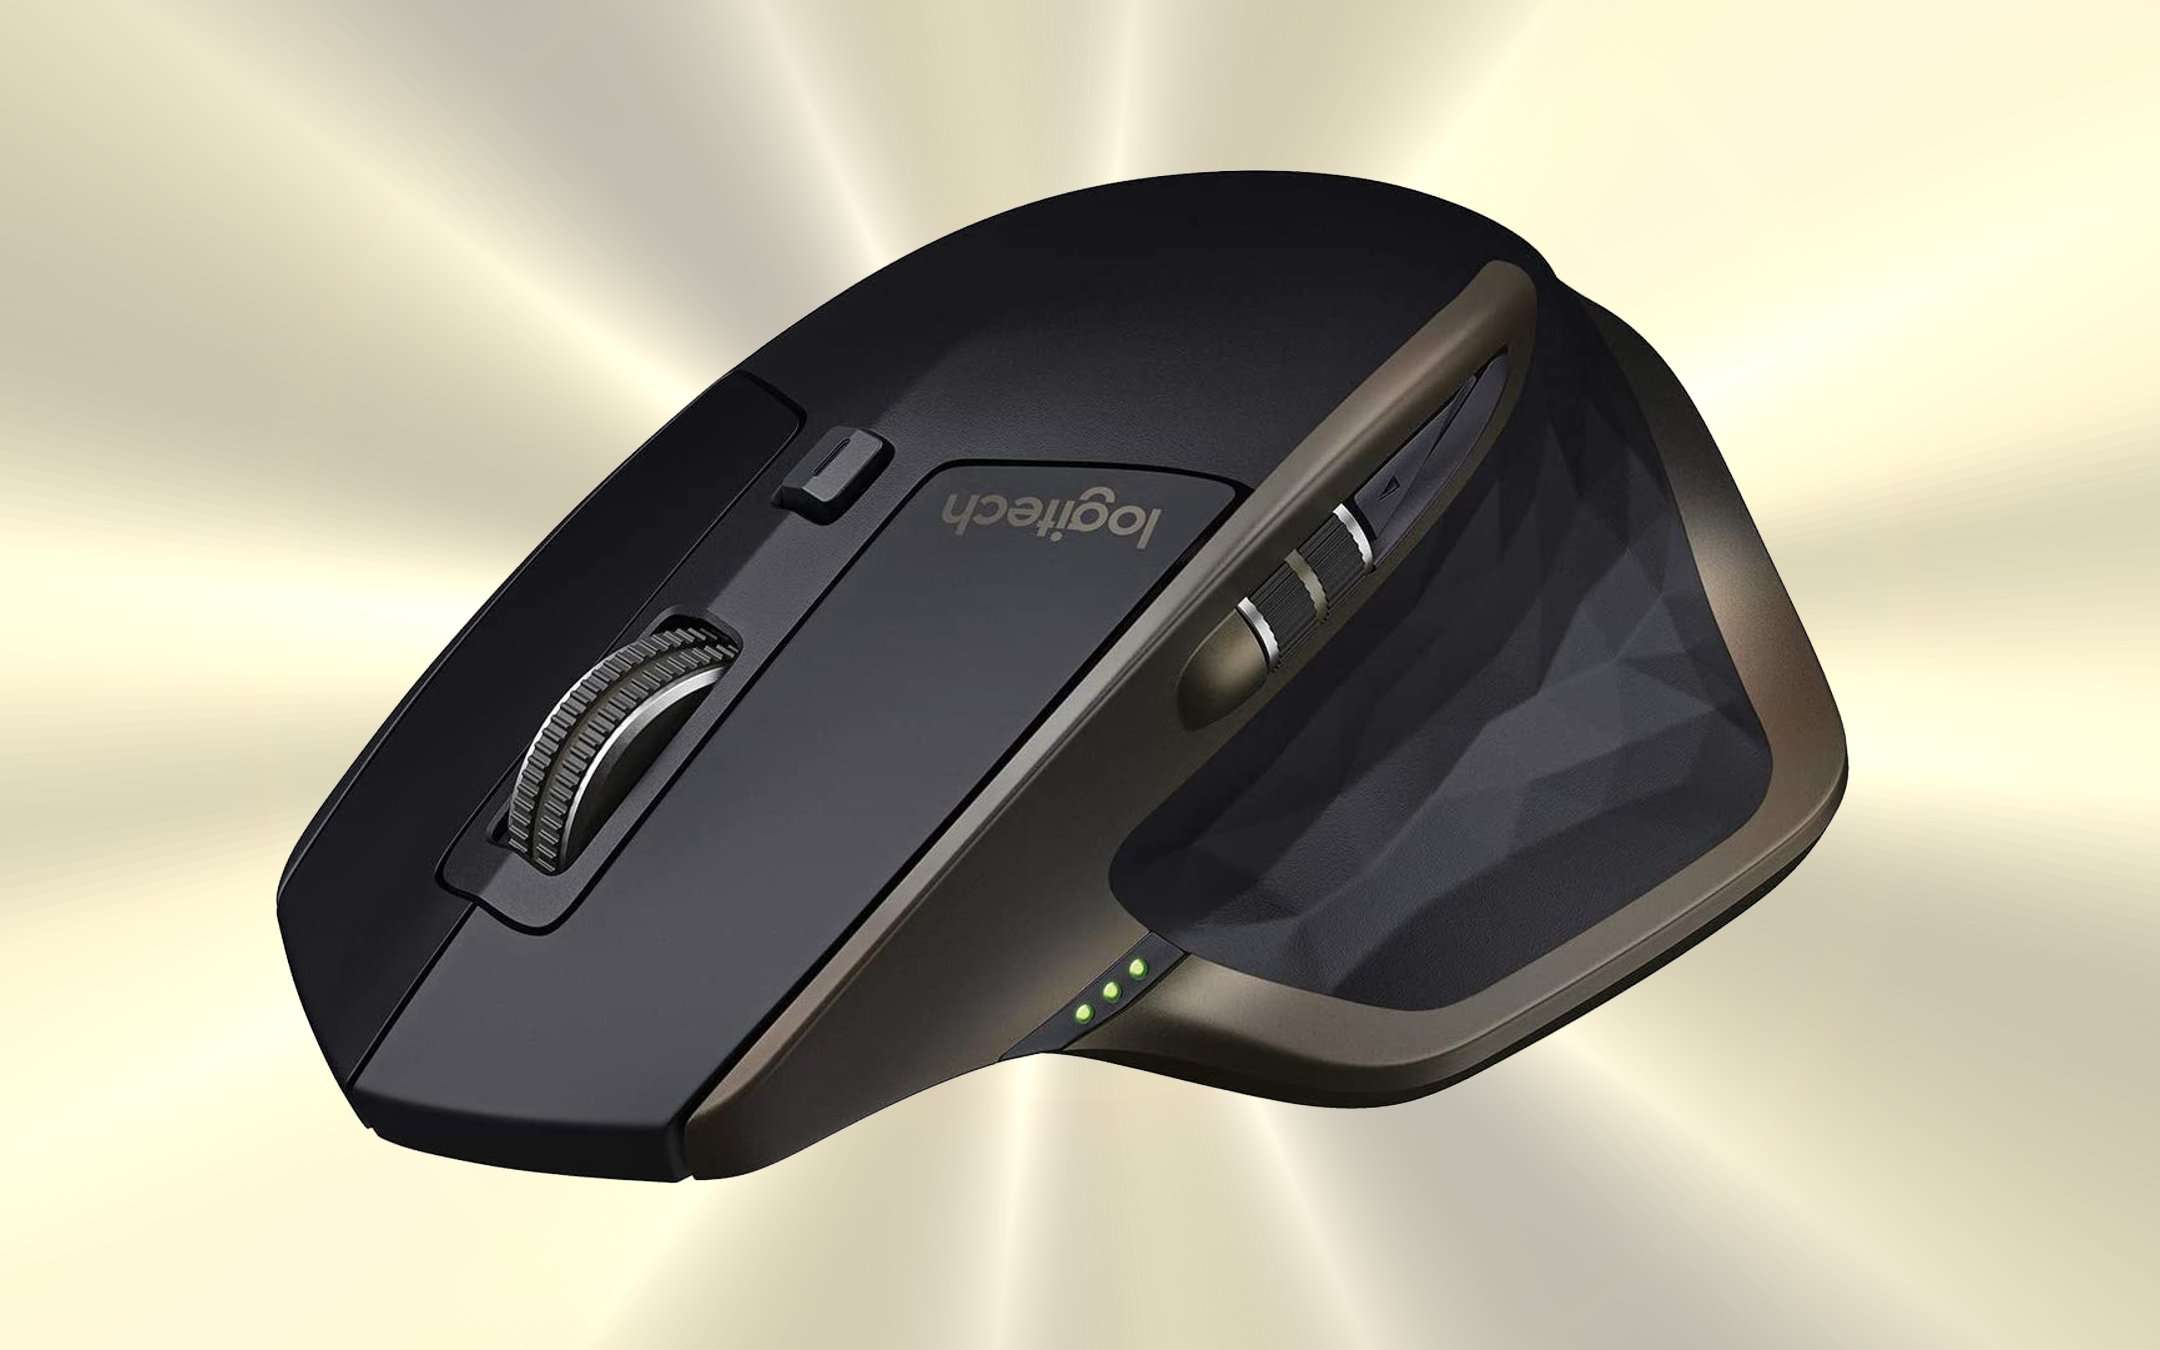 Higher quality mouse, but at a lower price